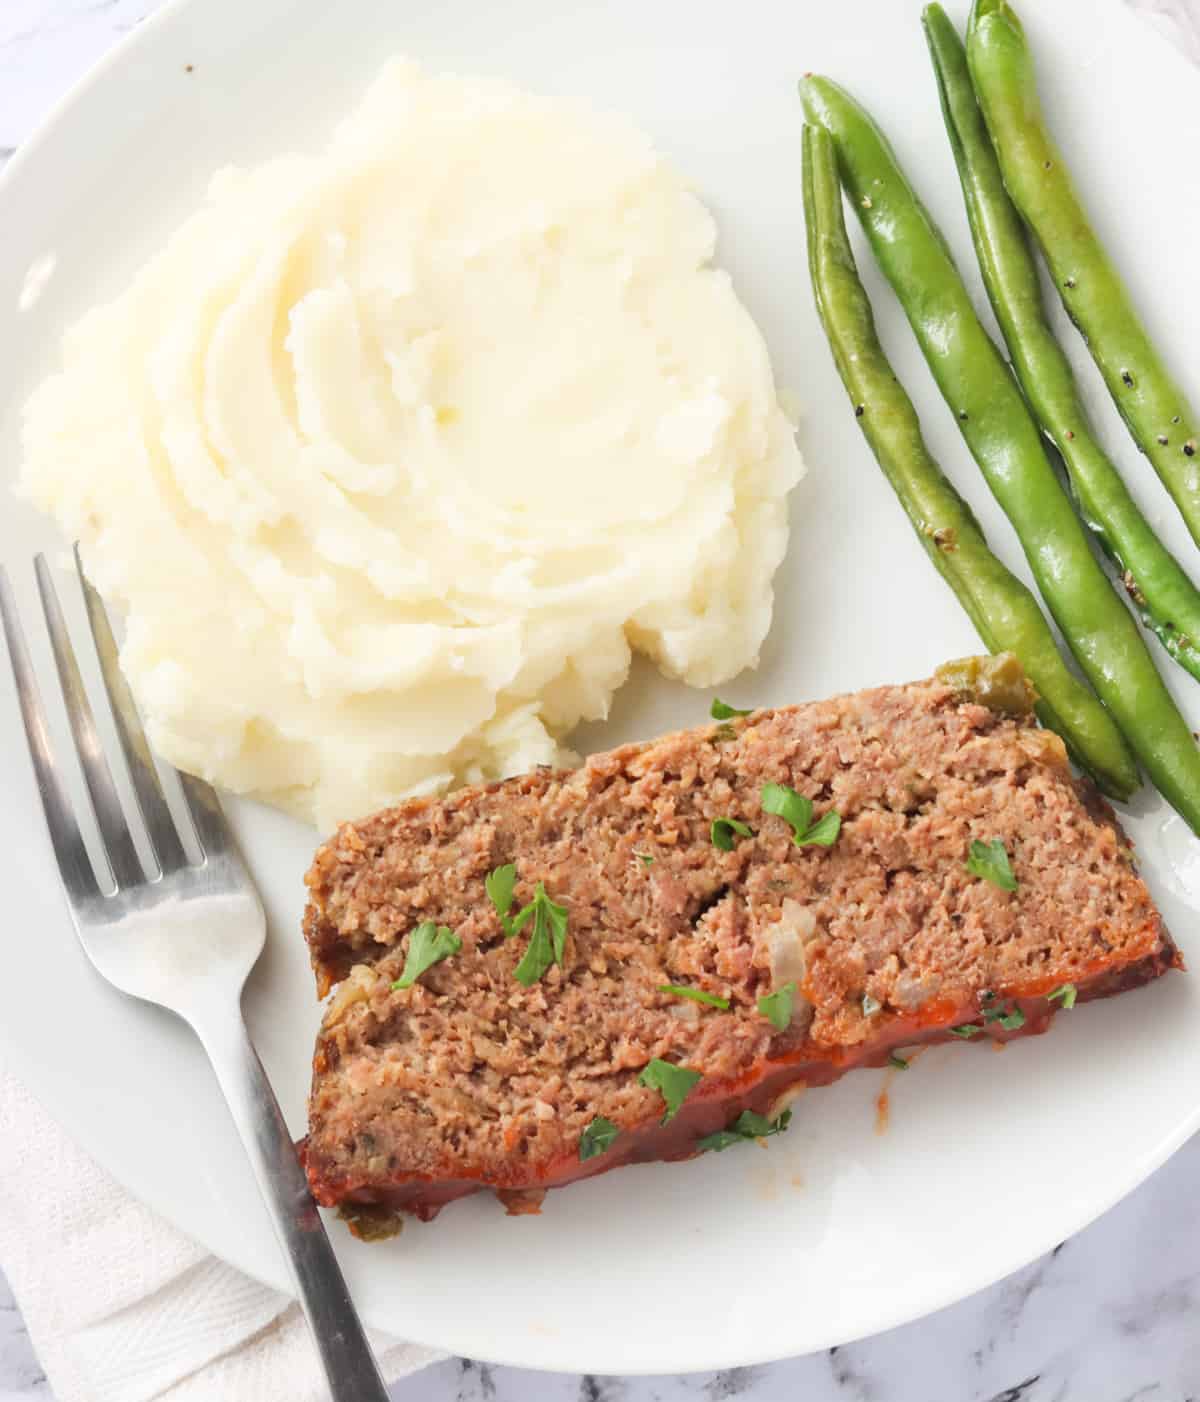 Enjoy Southern Meatloaf with mashed potatoes and roasted green beans